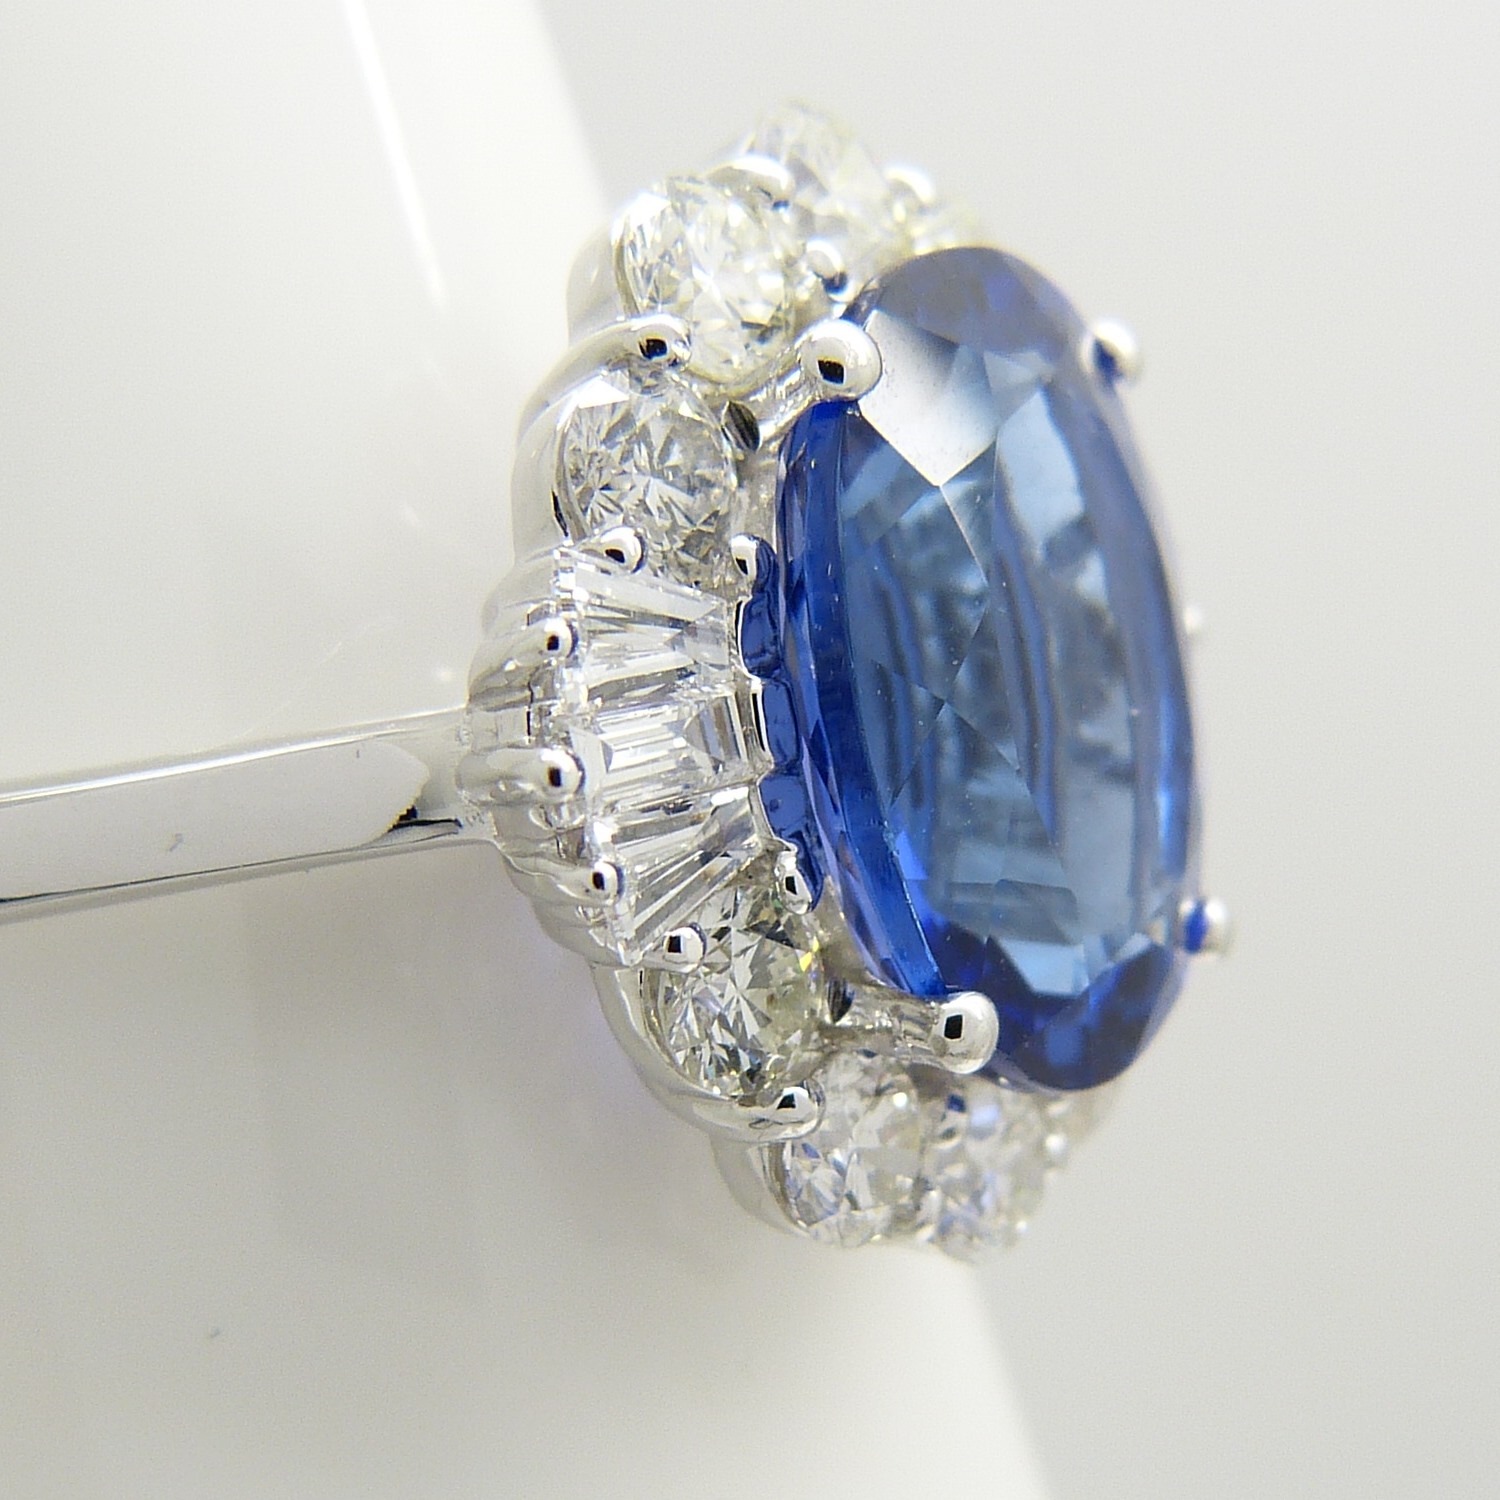 A stunning, certificated loupe-clean large tanzanite and diamond statement ring in 18ct white gold - Image 7 of 9